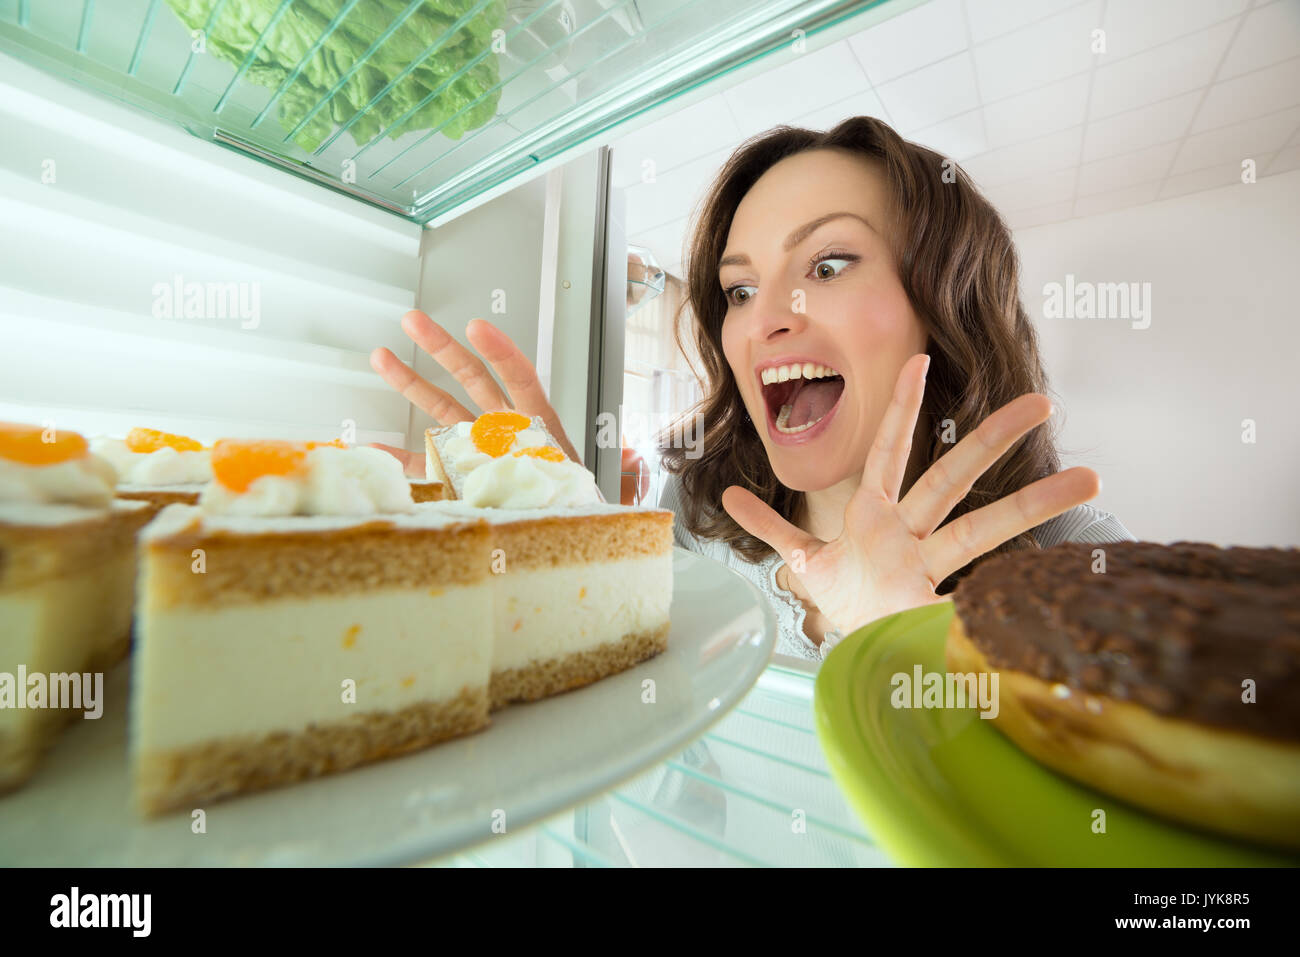 Excited Young Woman Looking At Cake In Refrigerator At Home Stock Photo